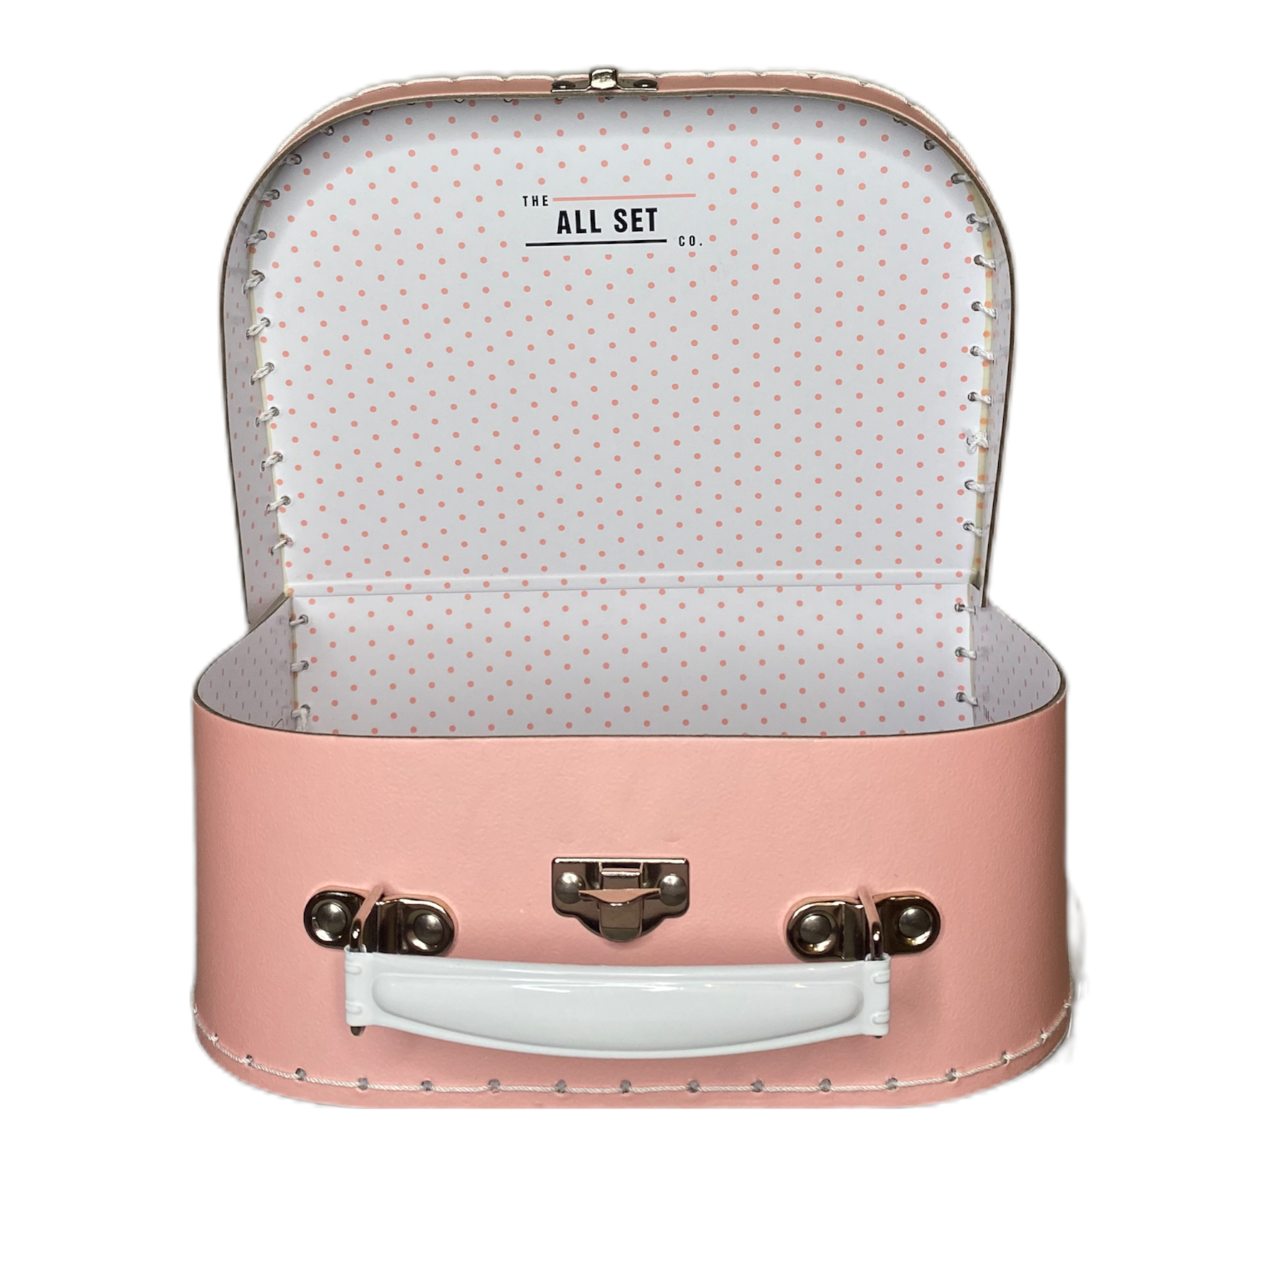 Pink Suitcase Style Gift Box for Keepsakes, Arts and Crafts, Toys, Wedding, Birthday, and More!